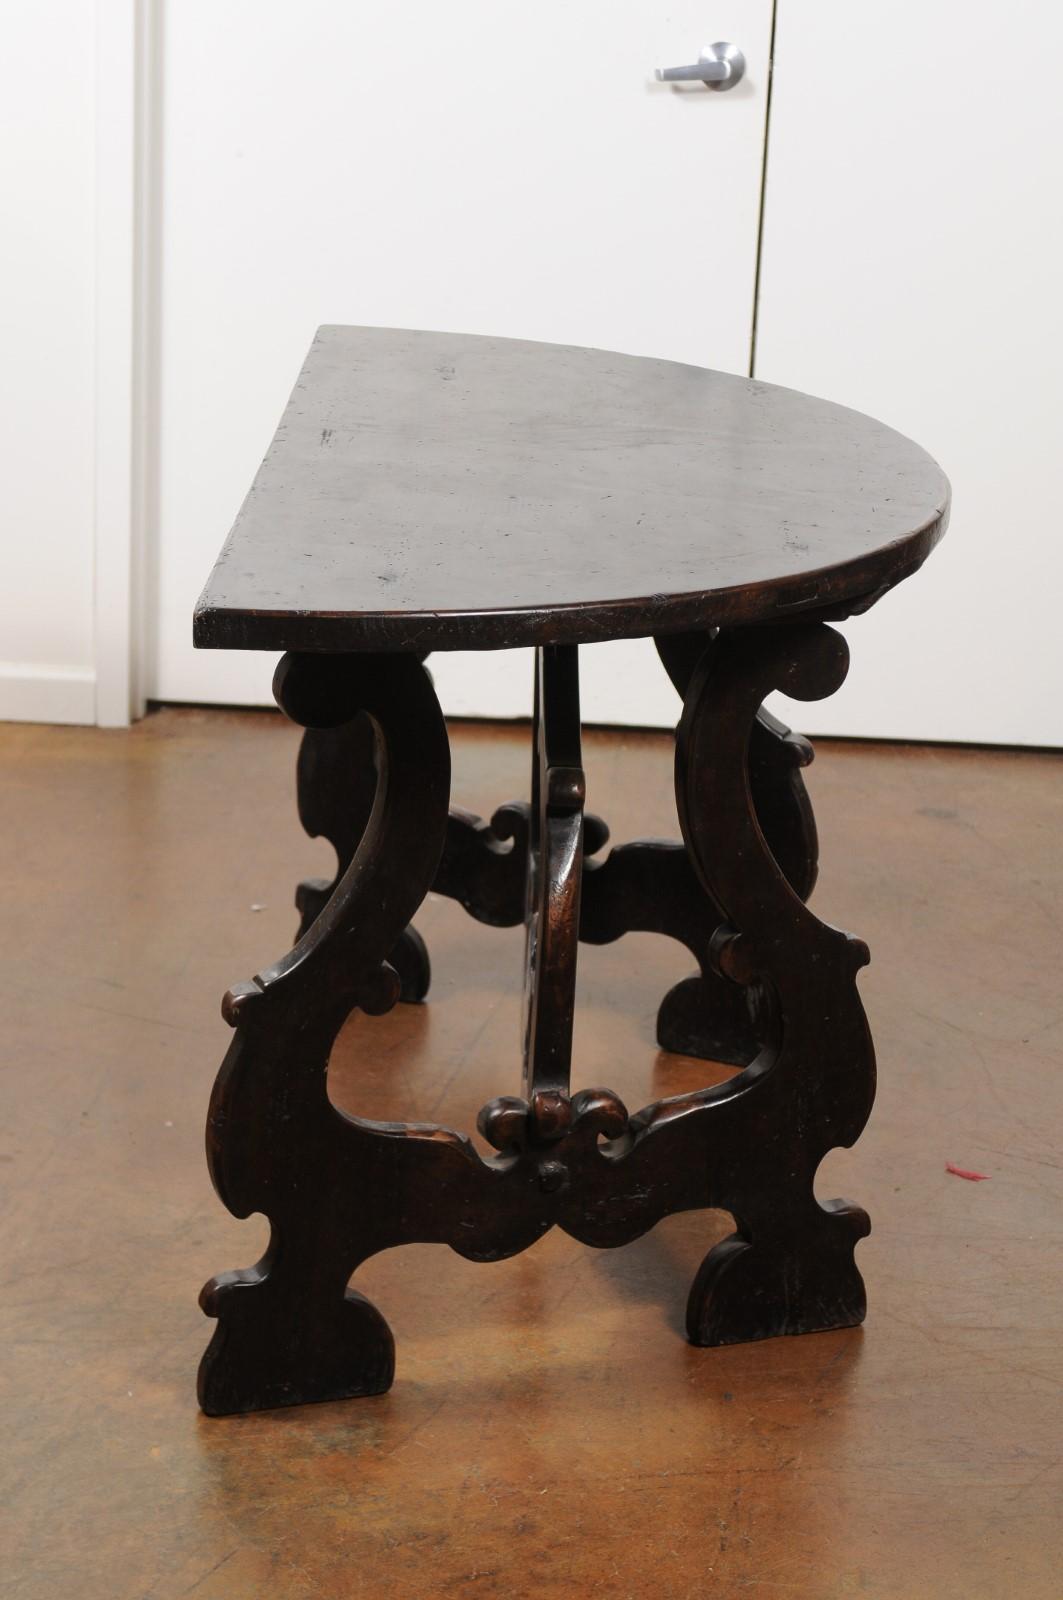 19th Century Pair of Italian Baroque Style Walnut Demilune Tables from Tuscany, circa 1800